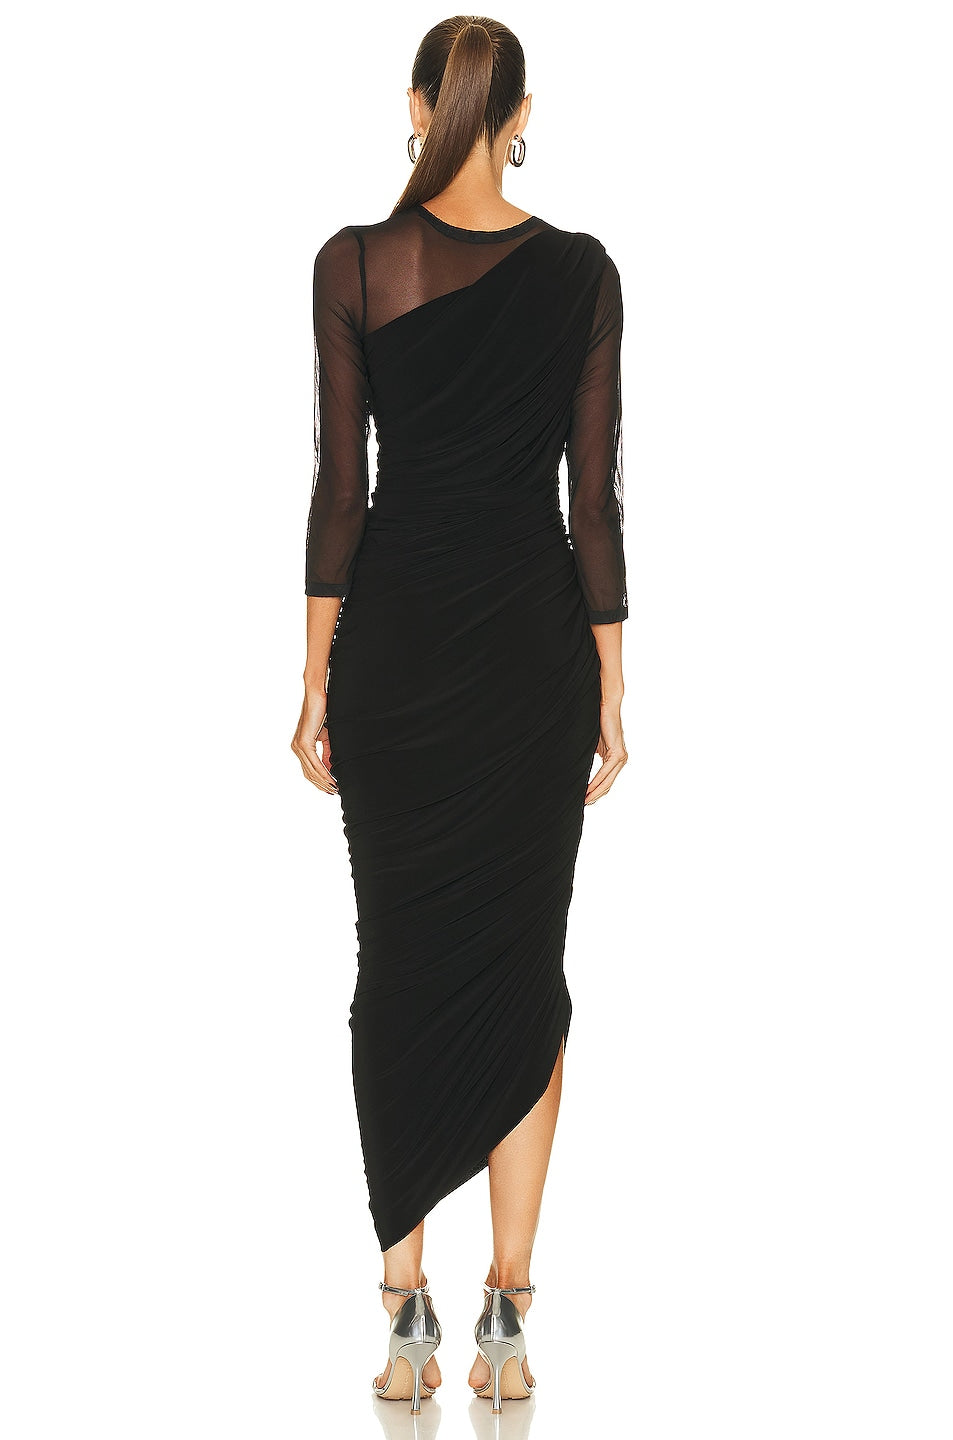 Norma Kamali Long Sleeve Diana Gown in Black & Black Mesh SIZE SMALL